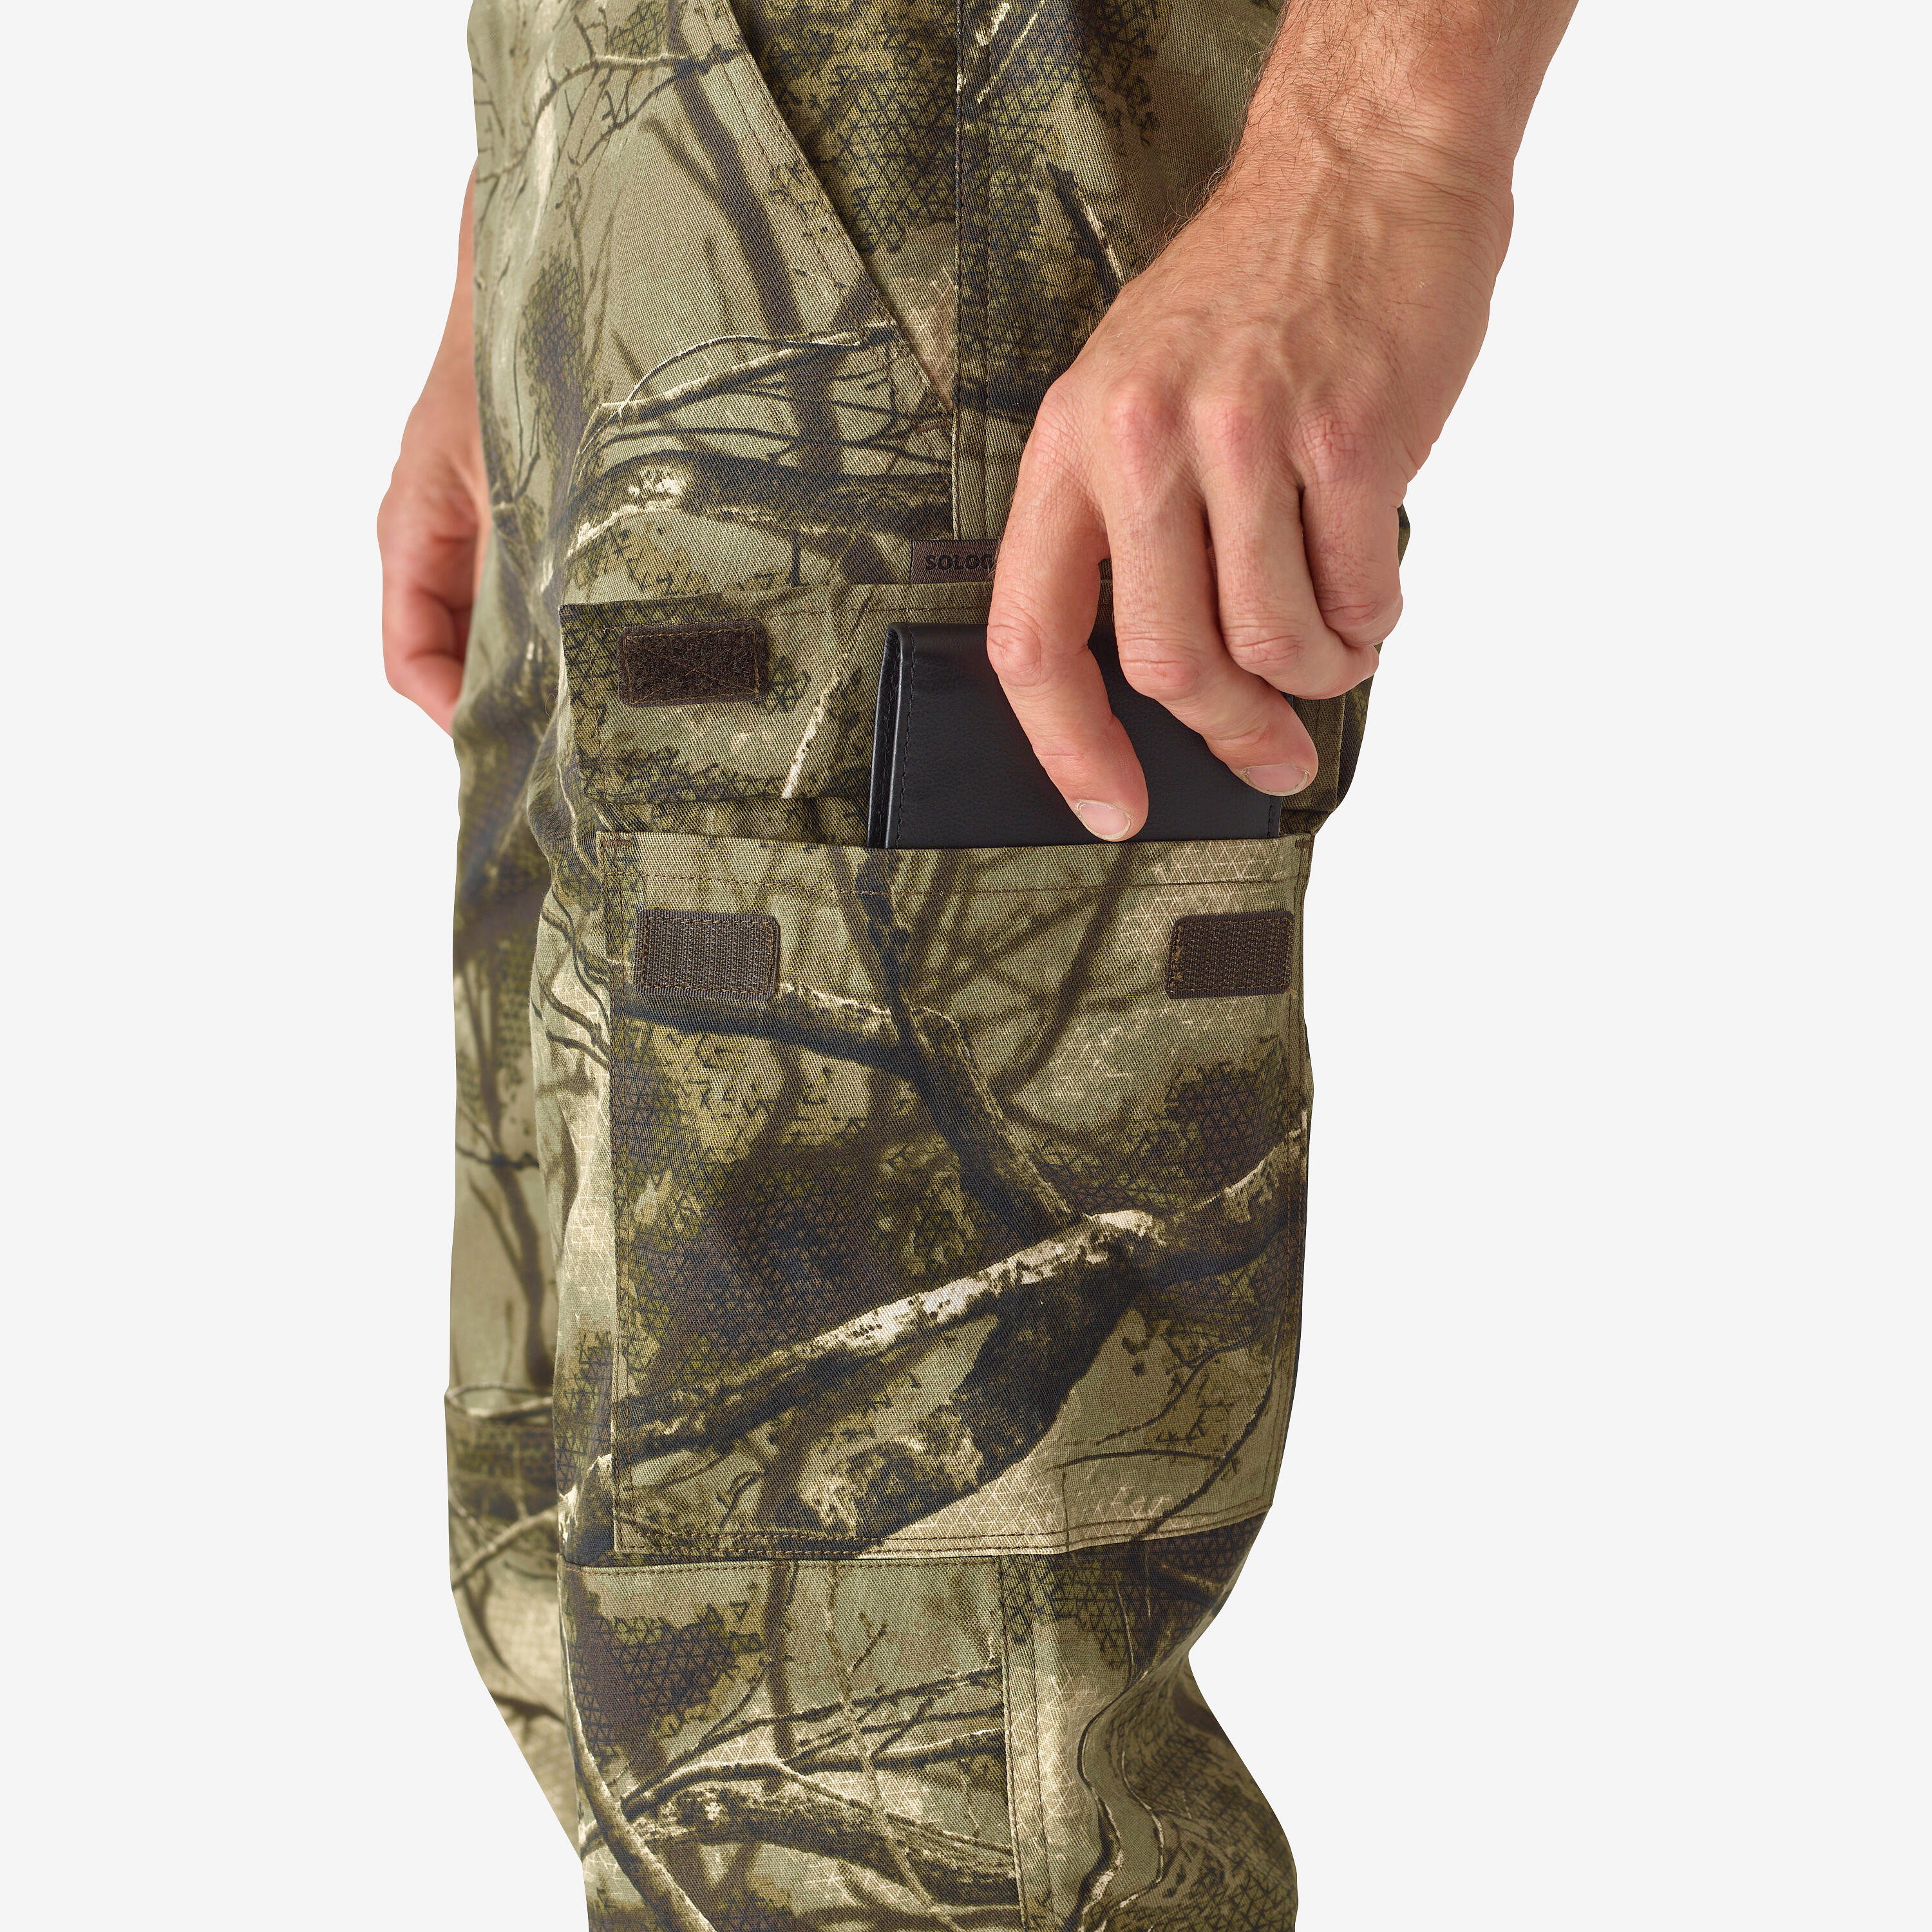 HUNTING BREATHABLE SILENT COTTON TROUSERS 100 TREEMETIC CAMOUFLAGE 4/6